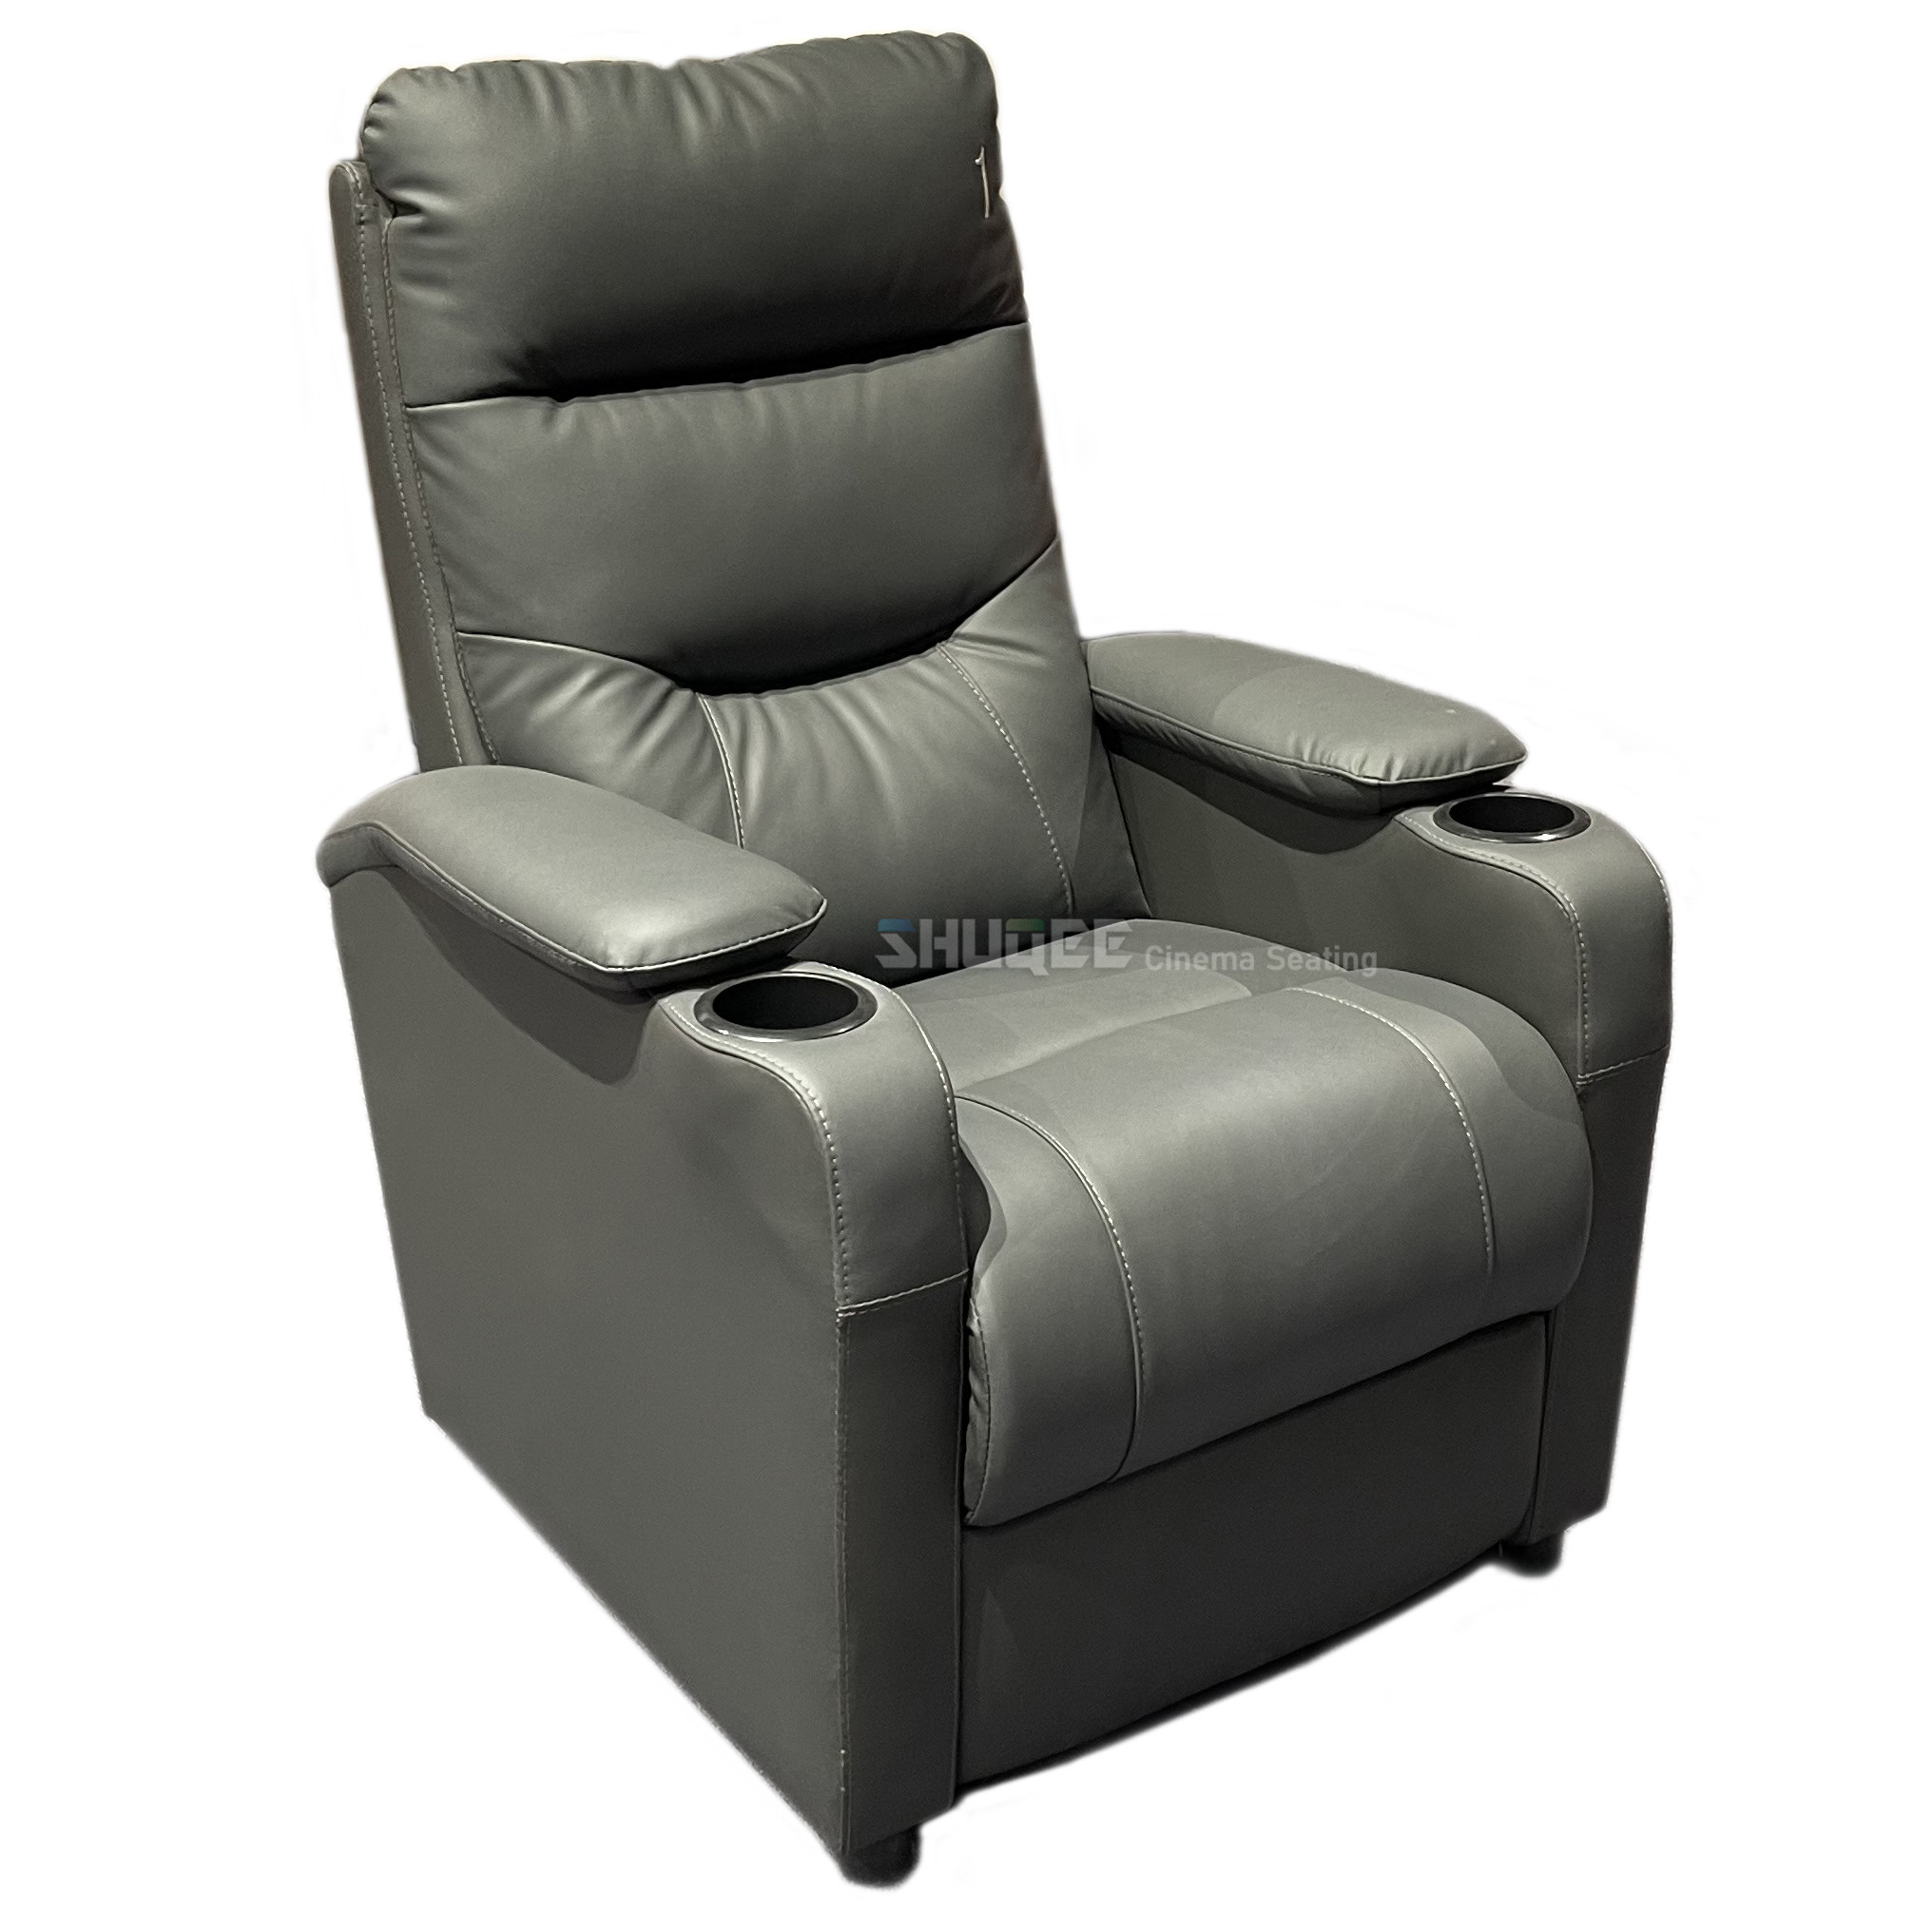 Modern Leather Home Theater Sofa Seating Multi color with Recline Function